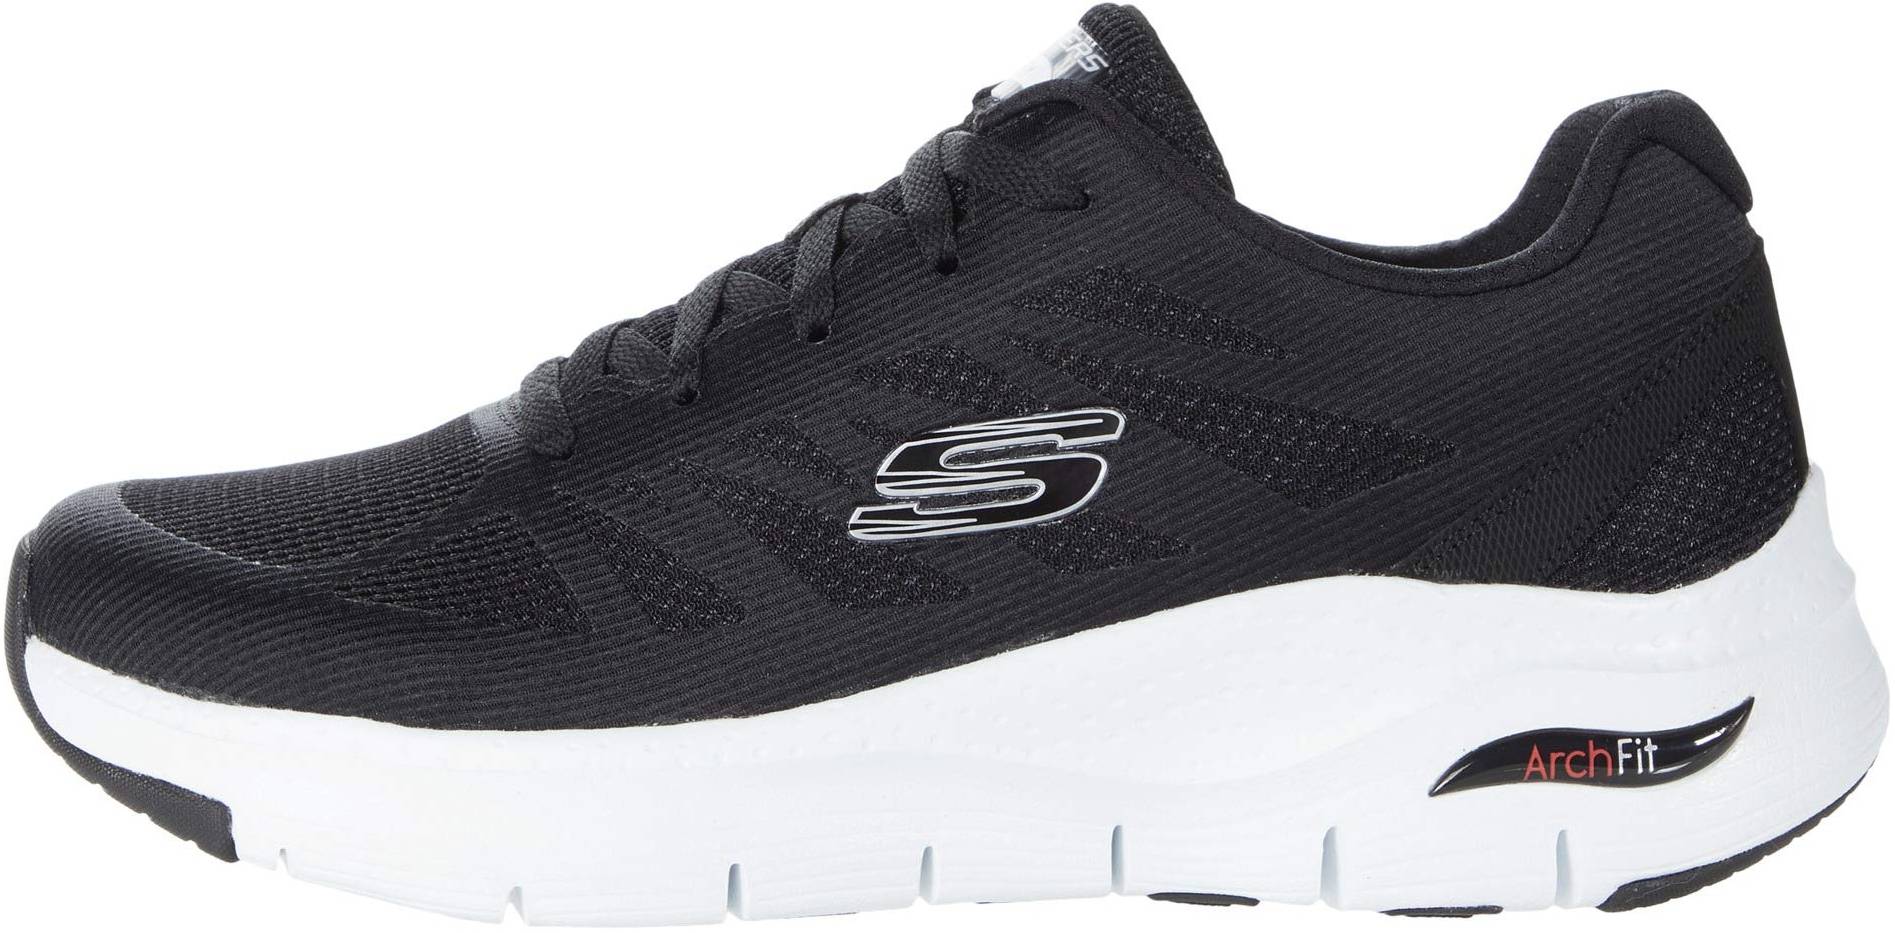 Skechers Arch Fit - Charge Back - Deals 